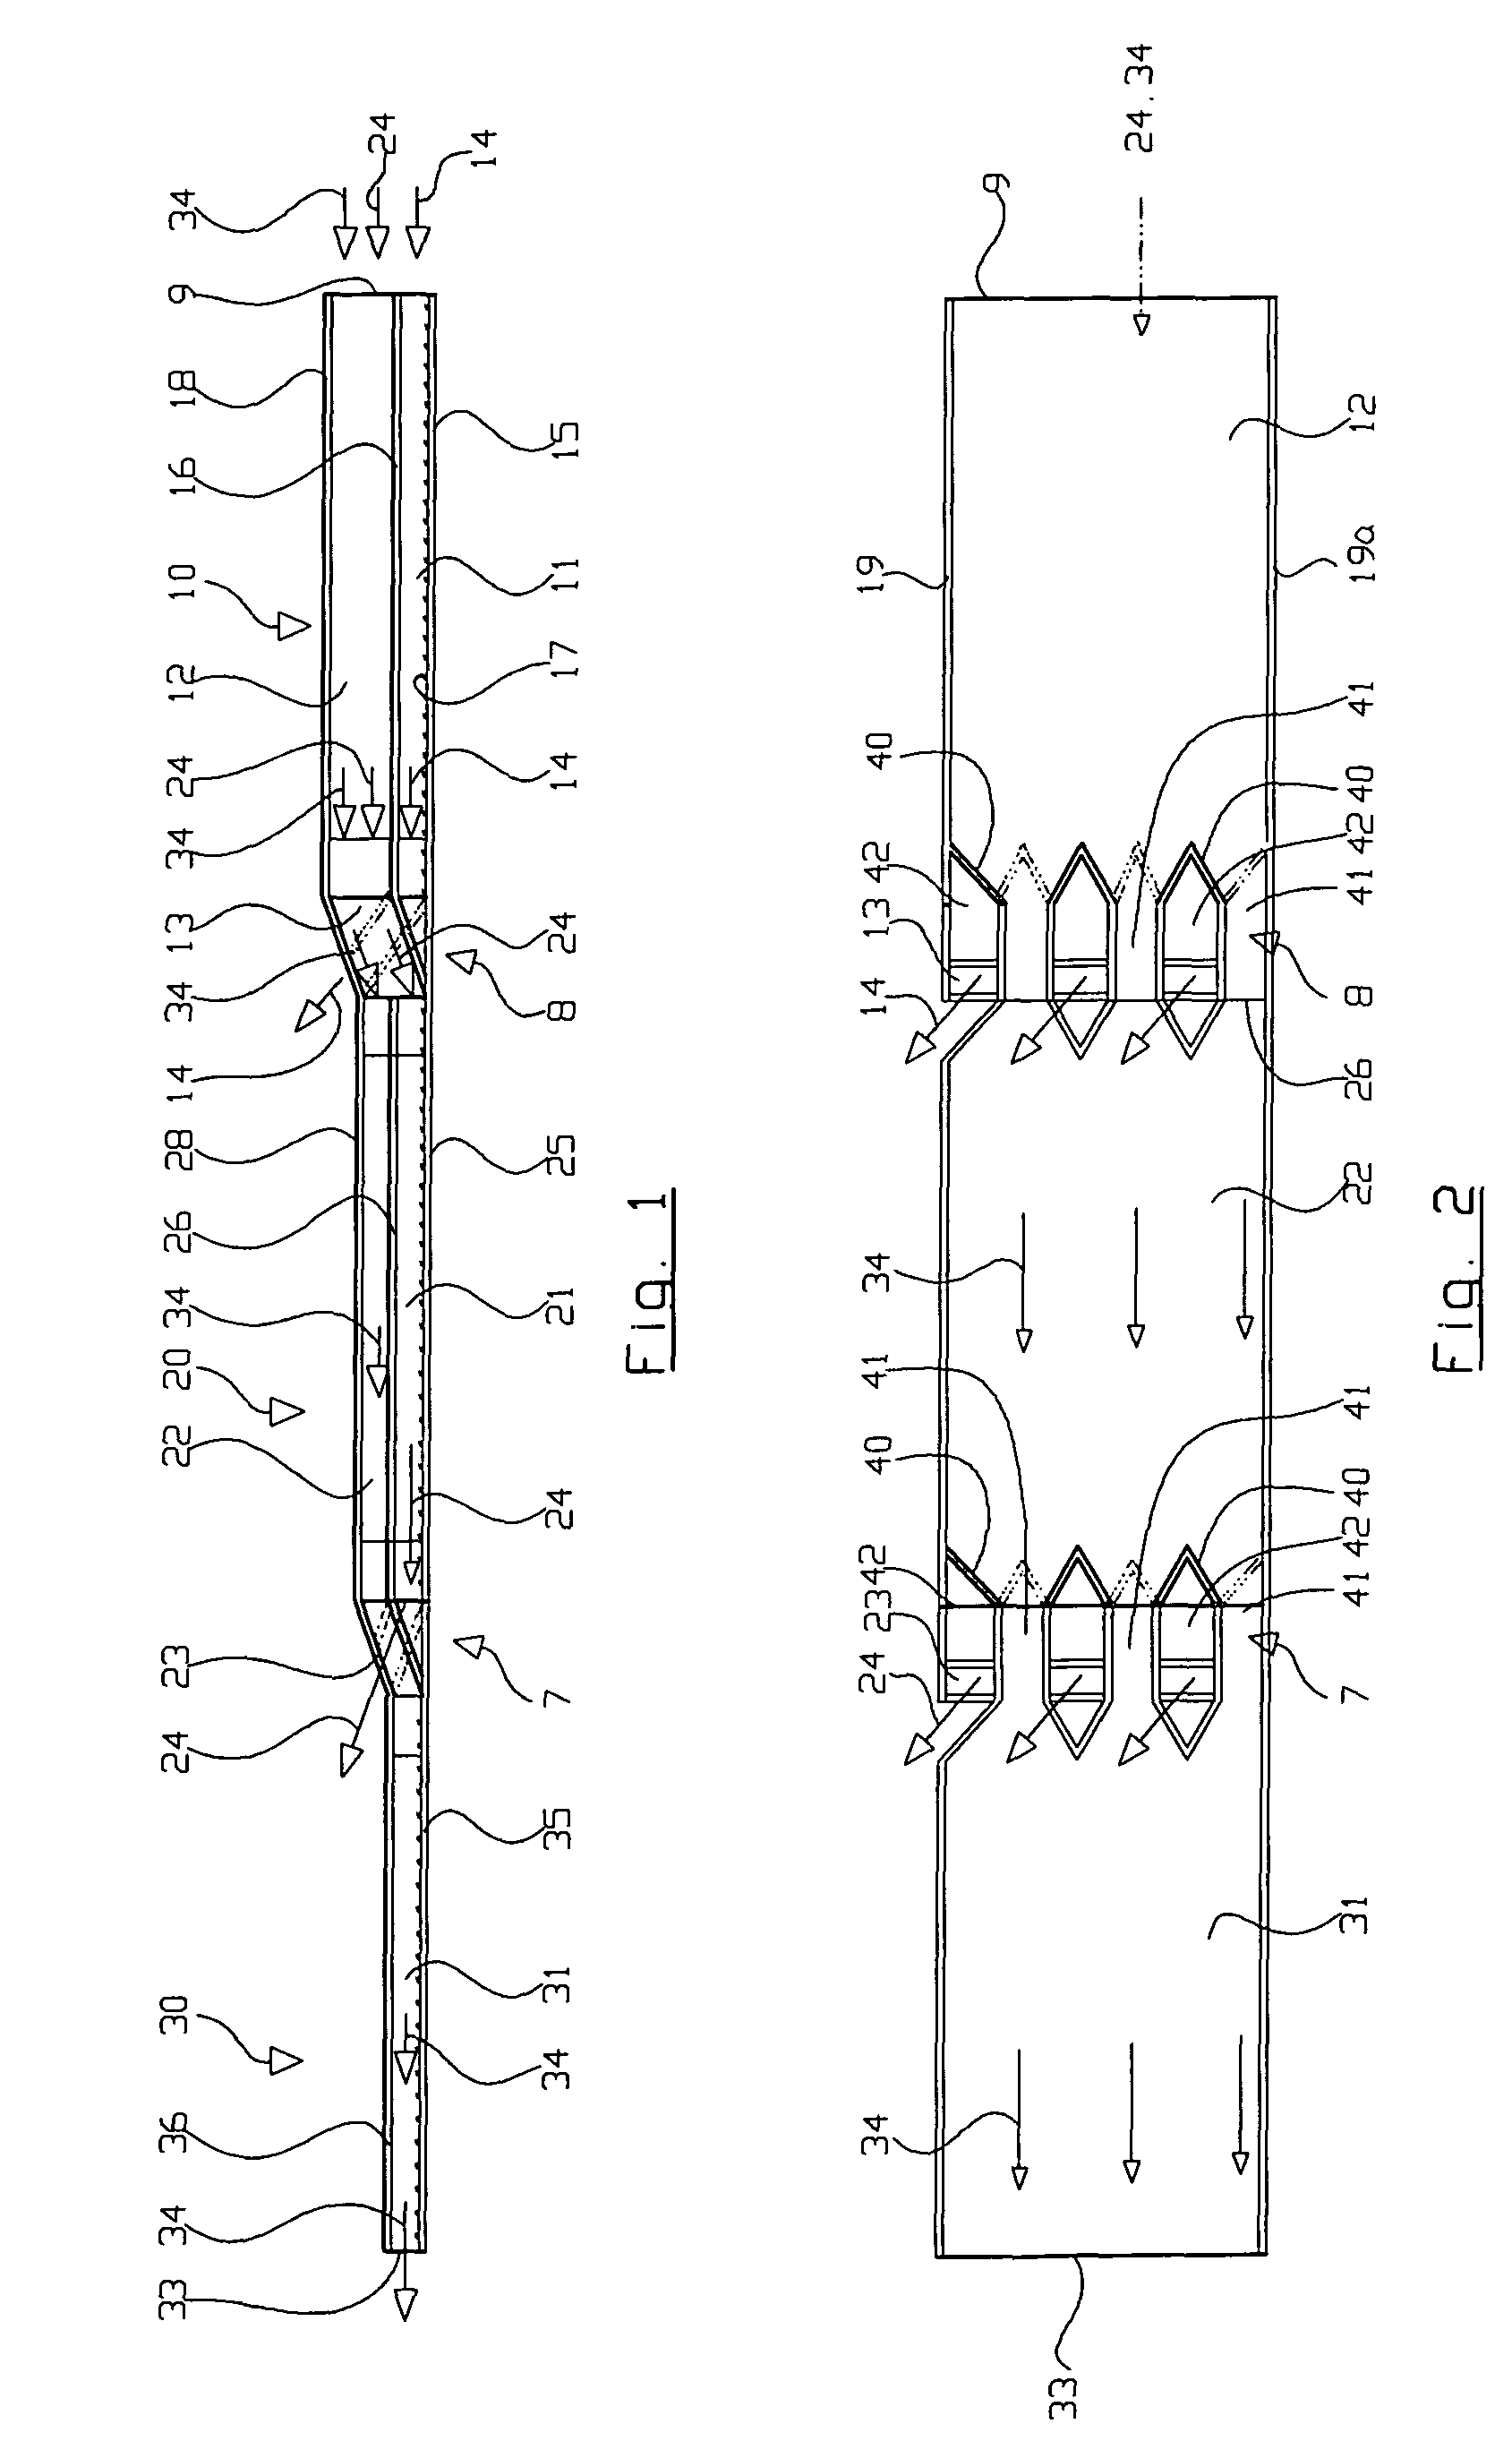 Multistage heat exchanging duct comprising a parallel conduit